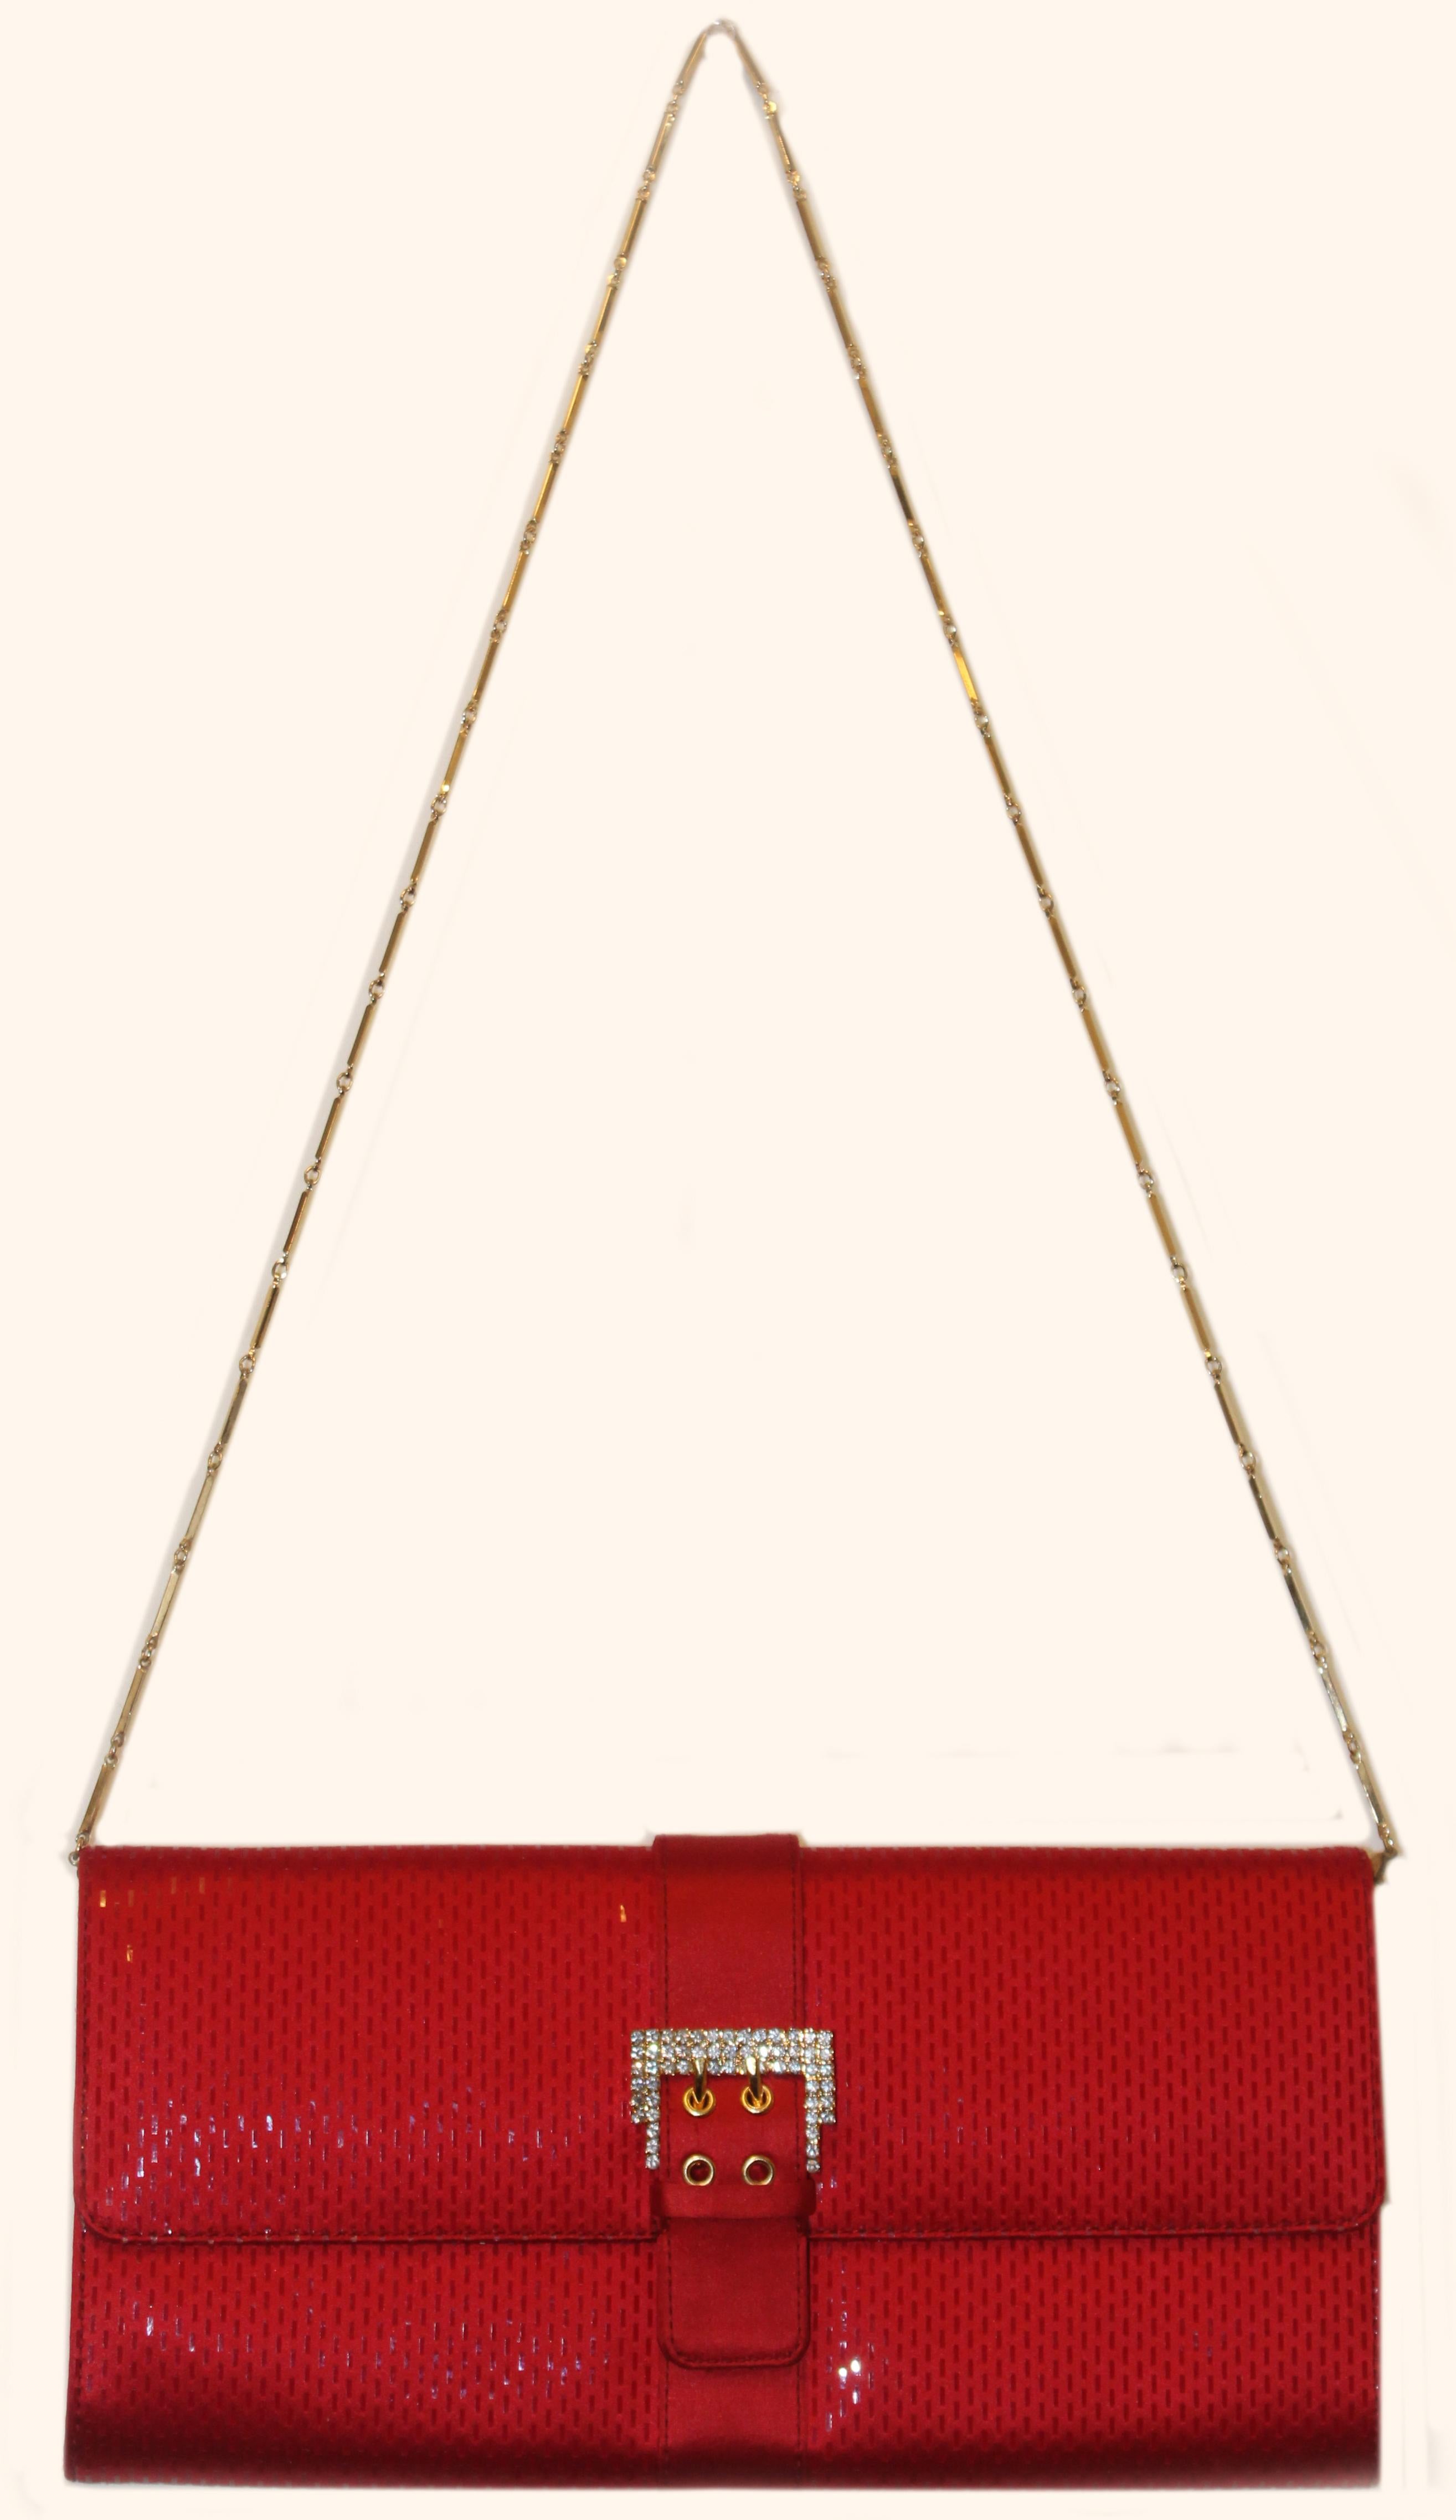 St John Red Sequined Satin Clutch W/ Crystal Buckle At Closure (Rot)